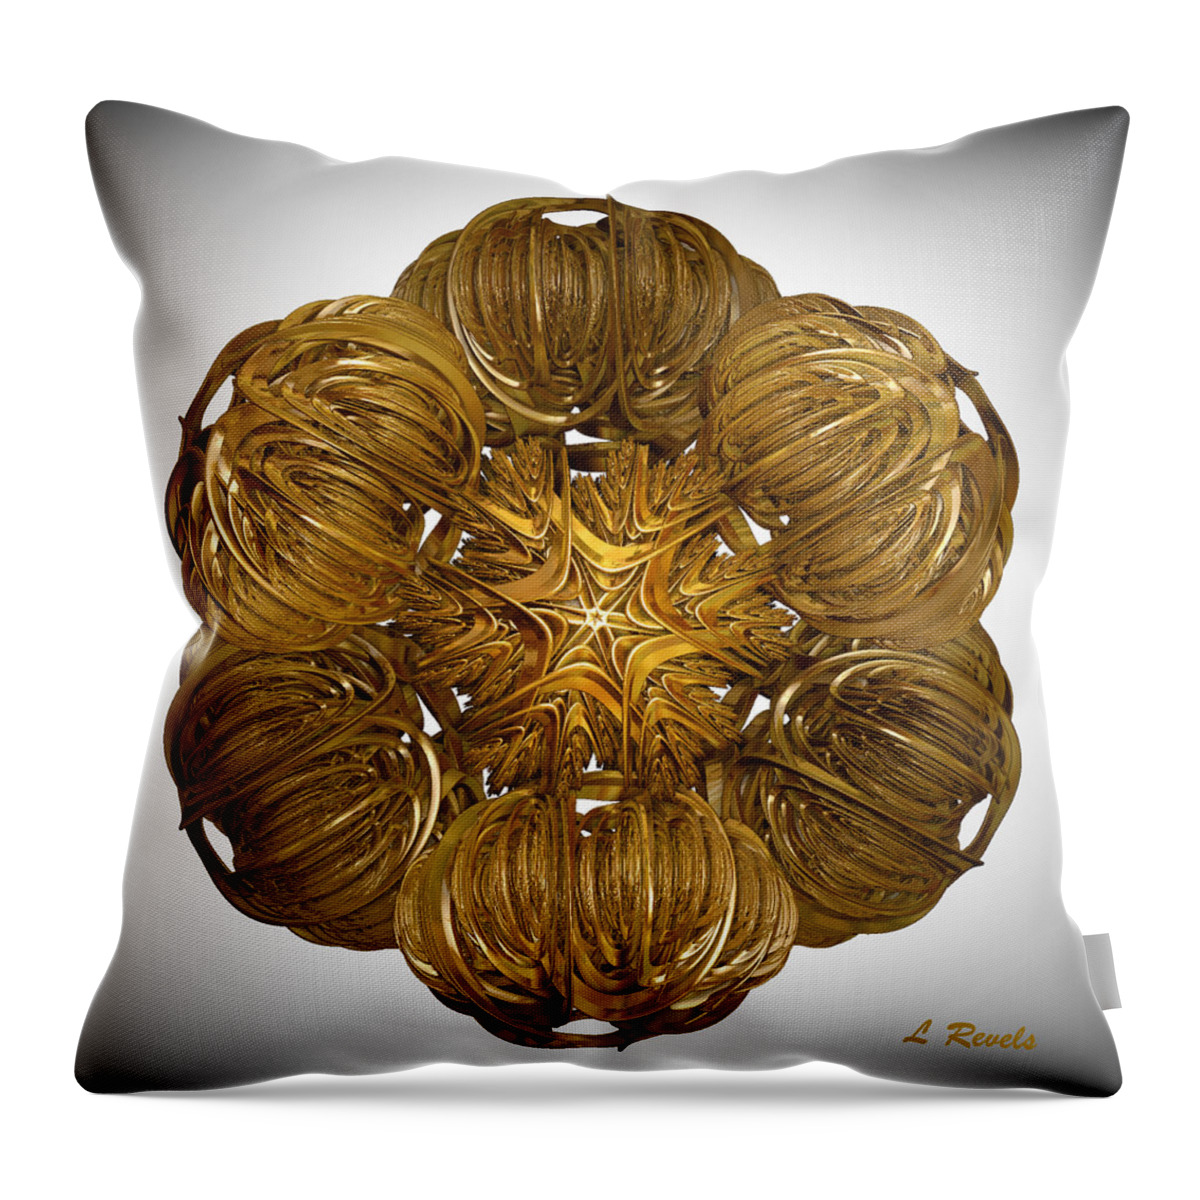 Abstract Throw Pillow featuring the digital art Midas Touch by Leslie Revels